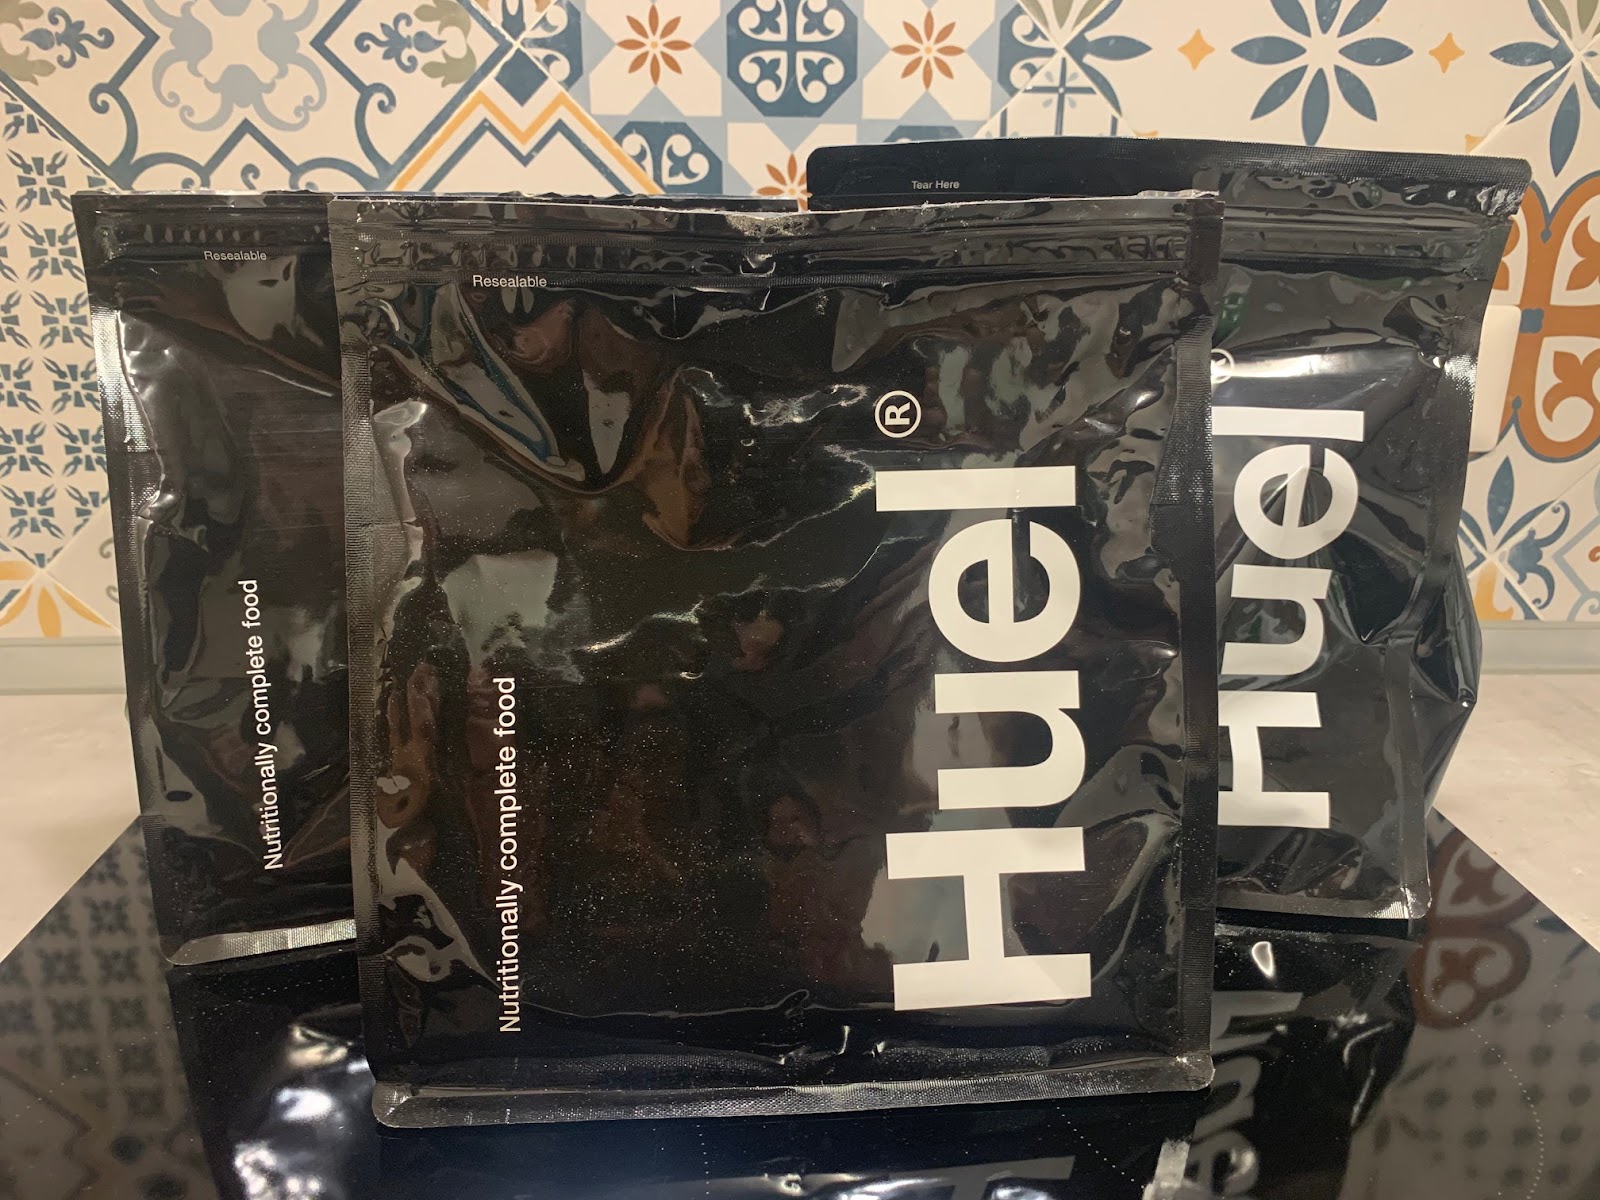 Huel Review: The Best Meal Replacement Option on the Market? 18